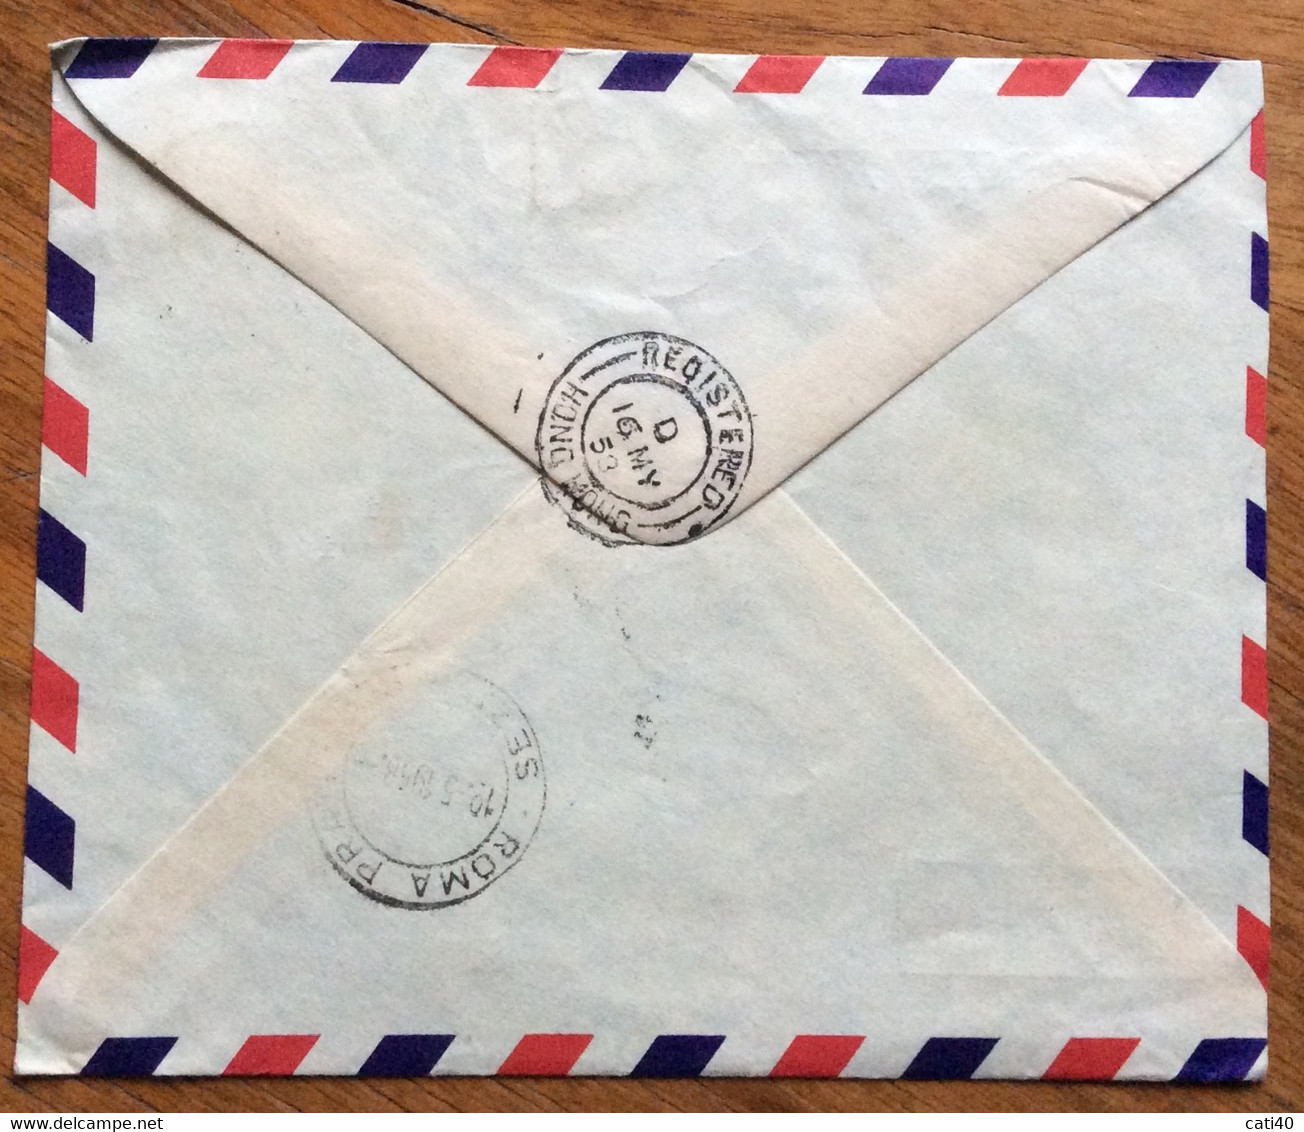 HONG KONG - REGISTERED AIR MAIL  CONSOLATO D'ITALIA FROM HONG KONG 16/5/59 TO  ROMA ITALY  Blocco Ten Cents + One Dollar - Covers & Documents